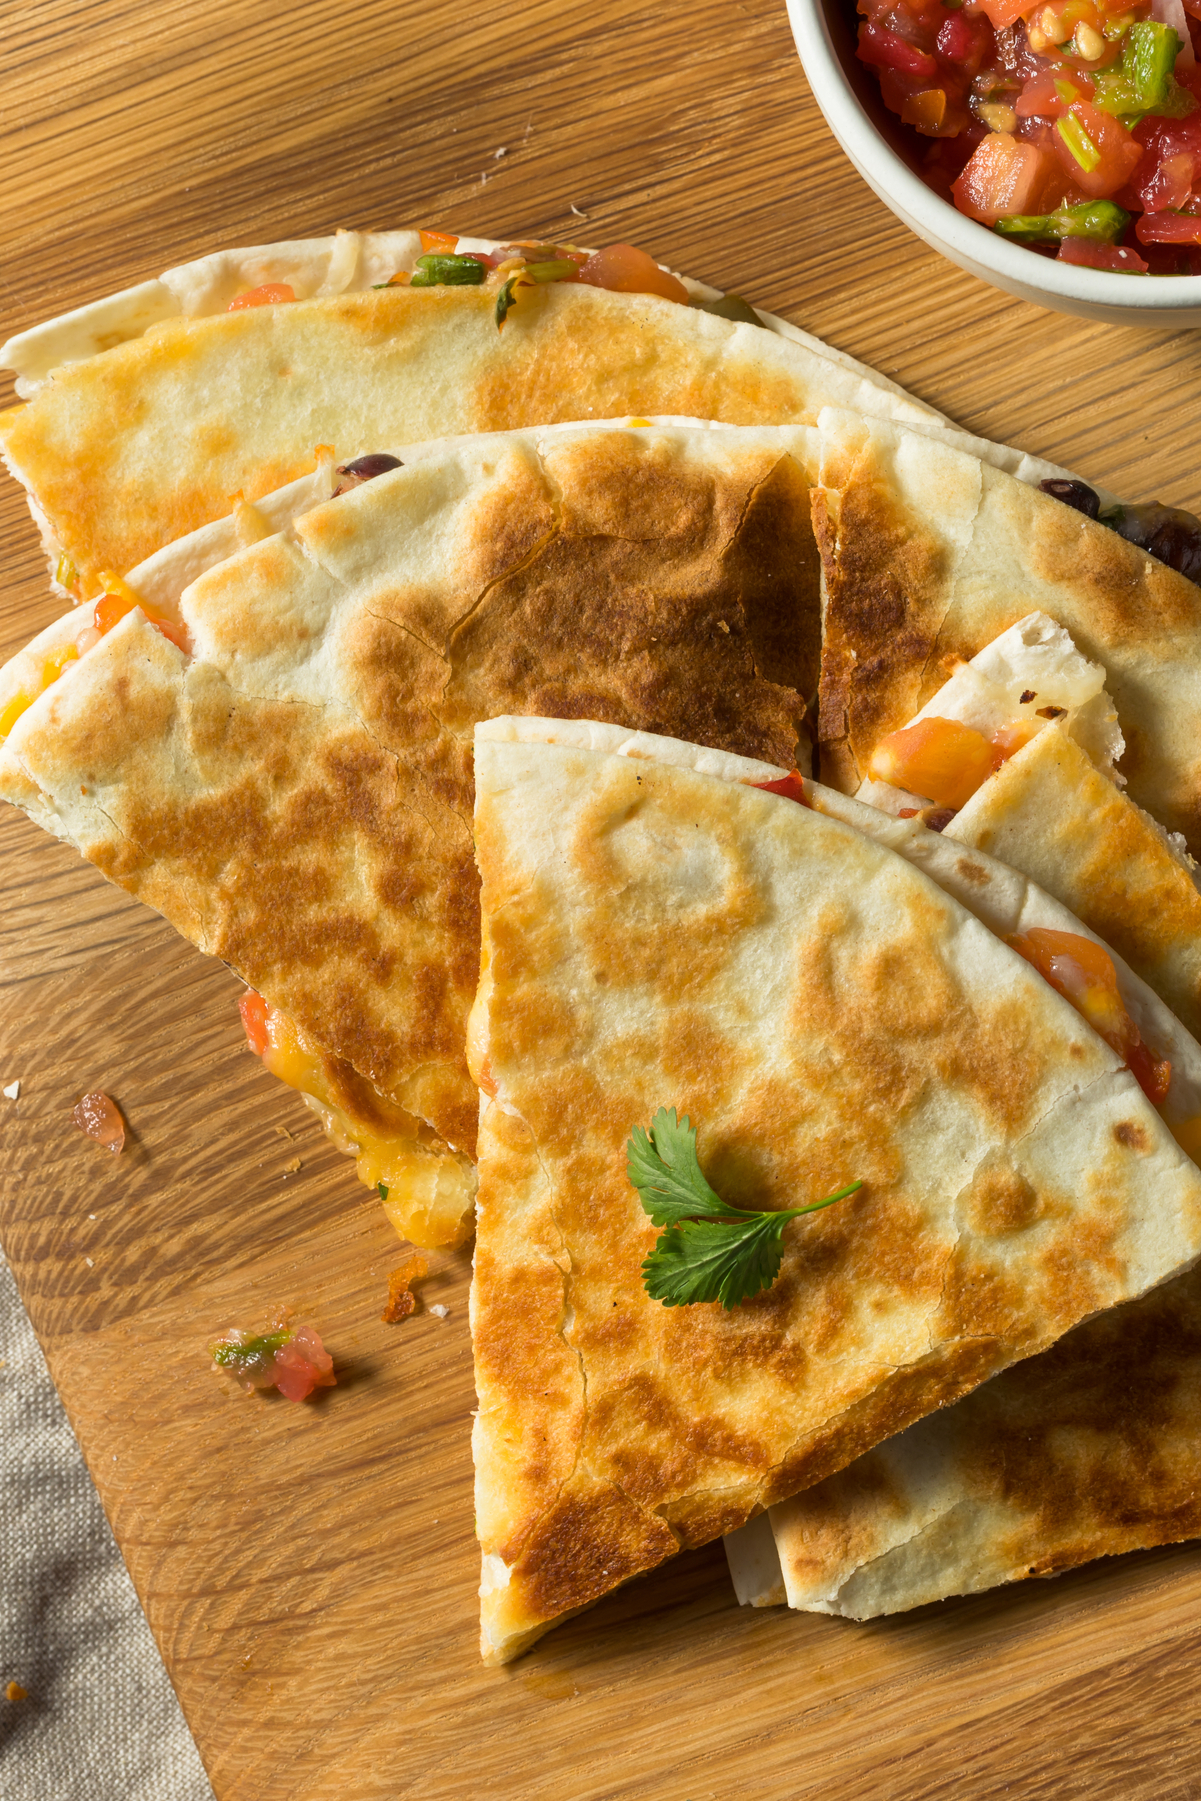 Weight Watchers Vegetable Quesadilla on a wooden cutting board.